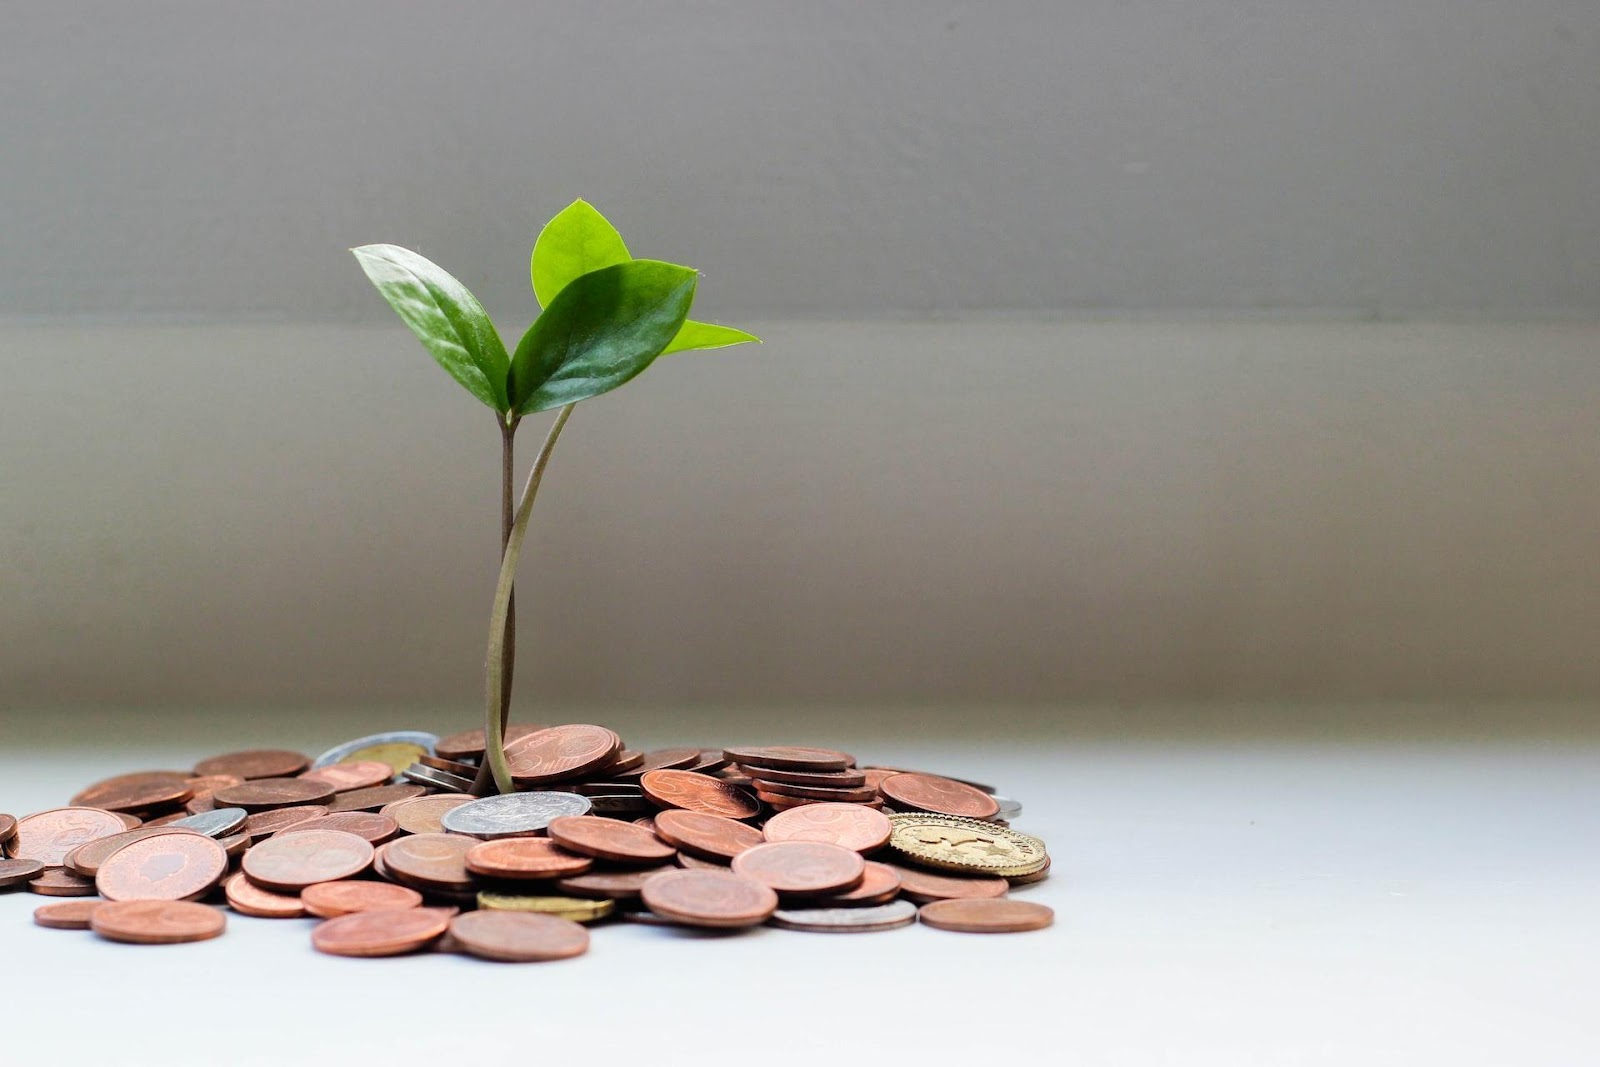 A picture of a plant growing out of some money to show how MbenzGram (MBGRAM) has grown organically